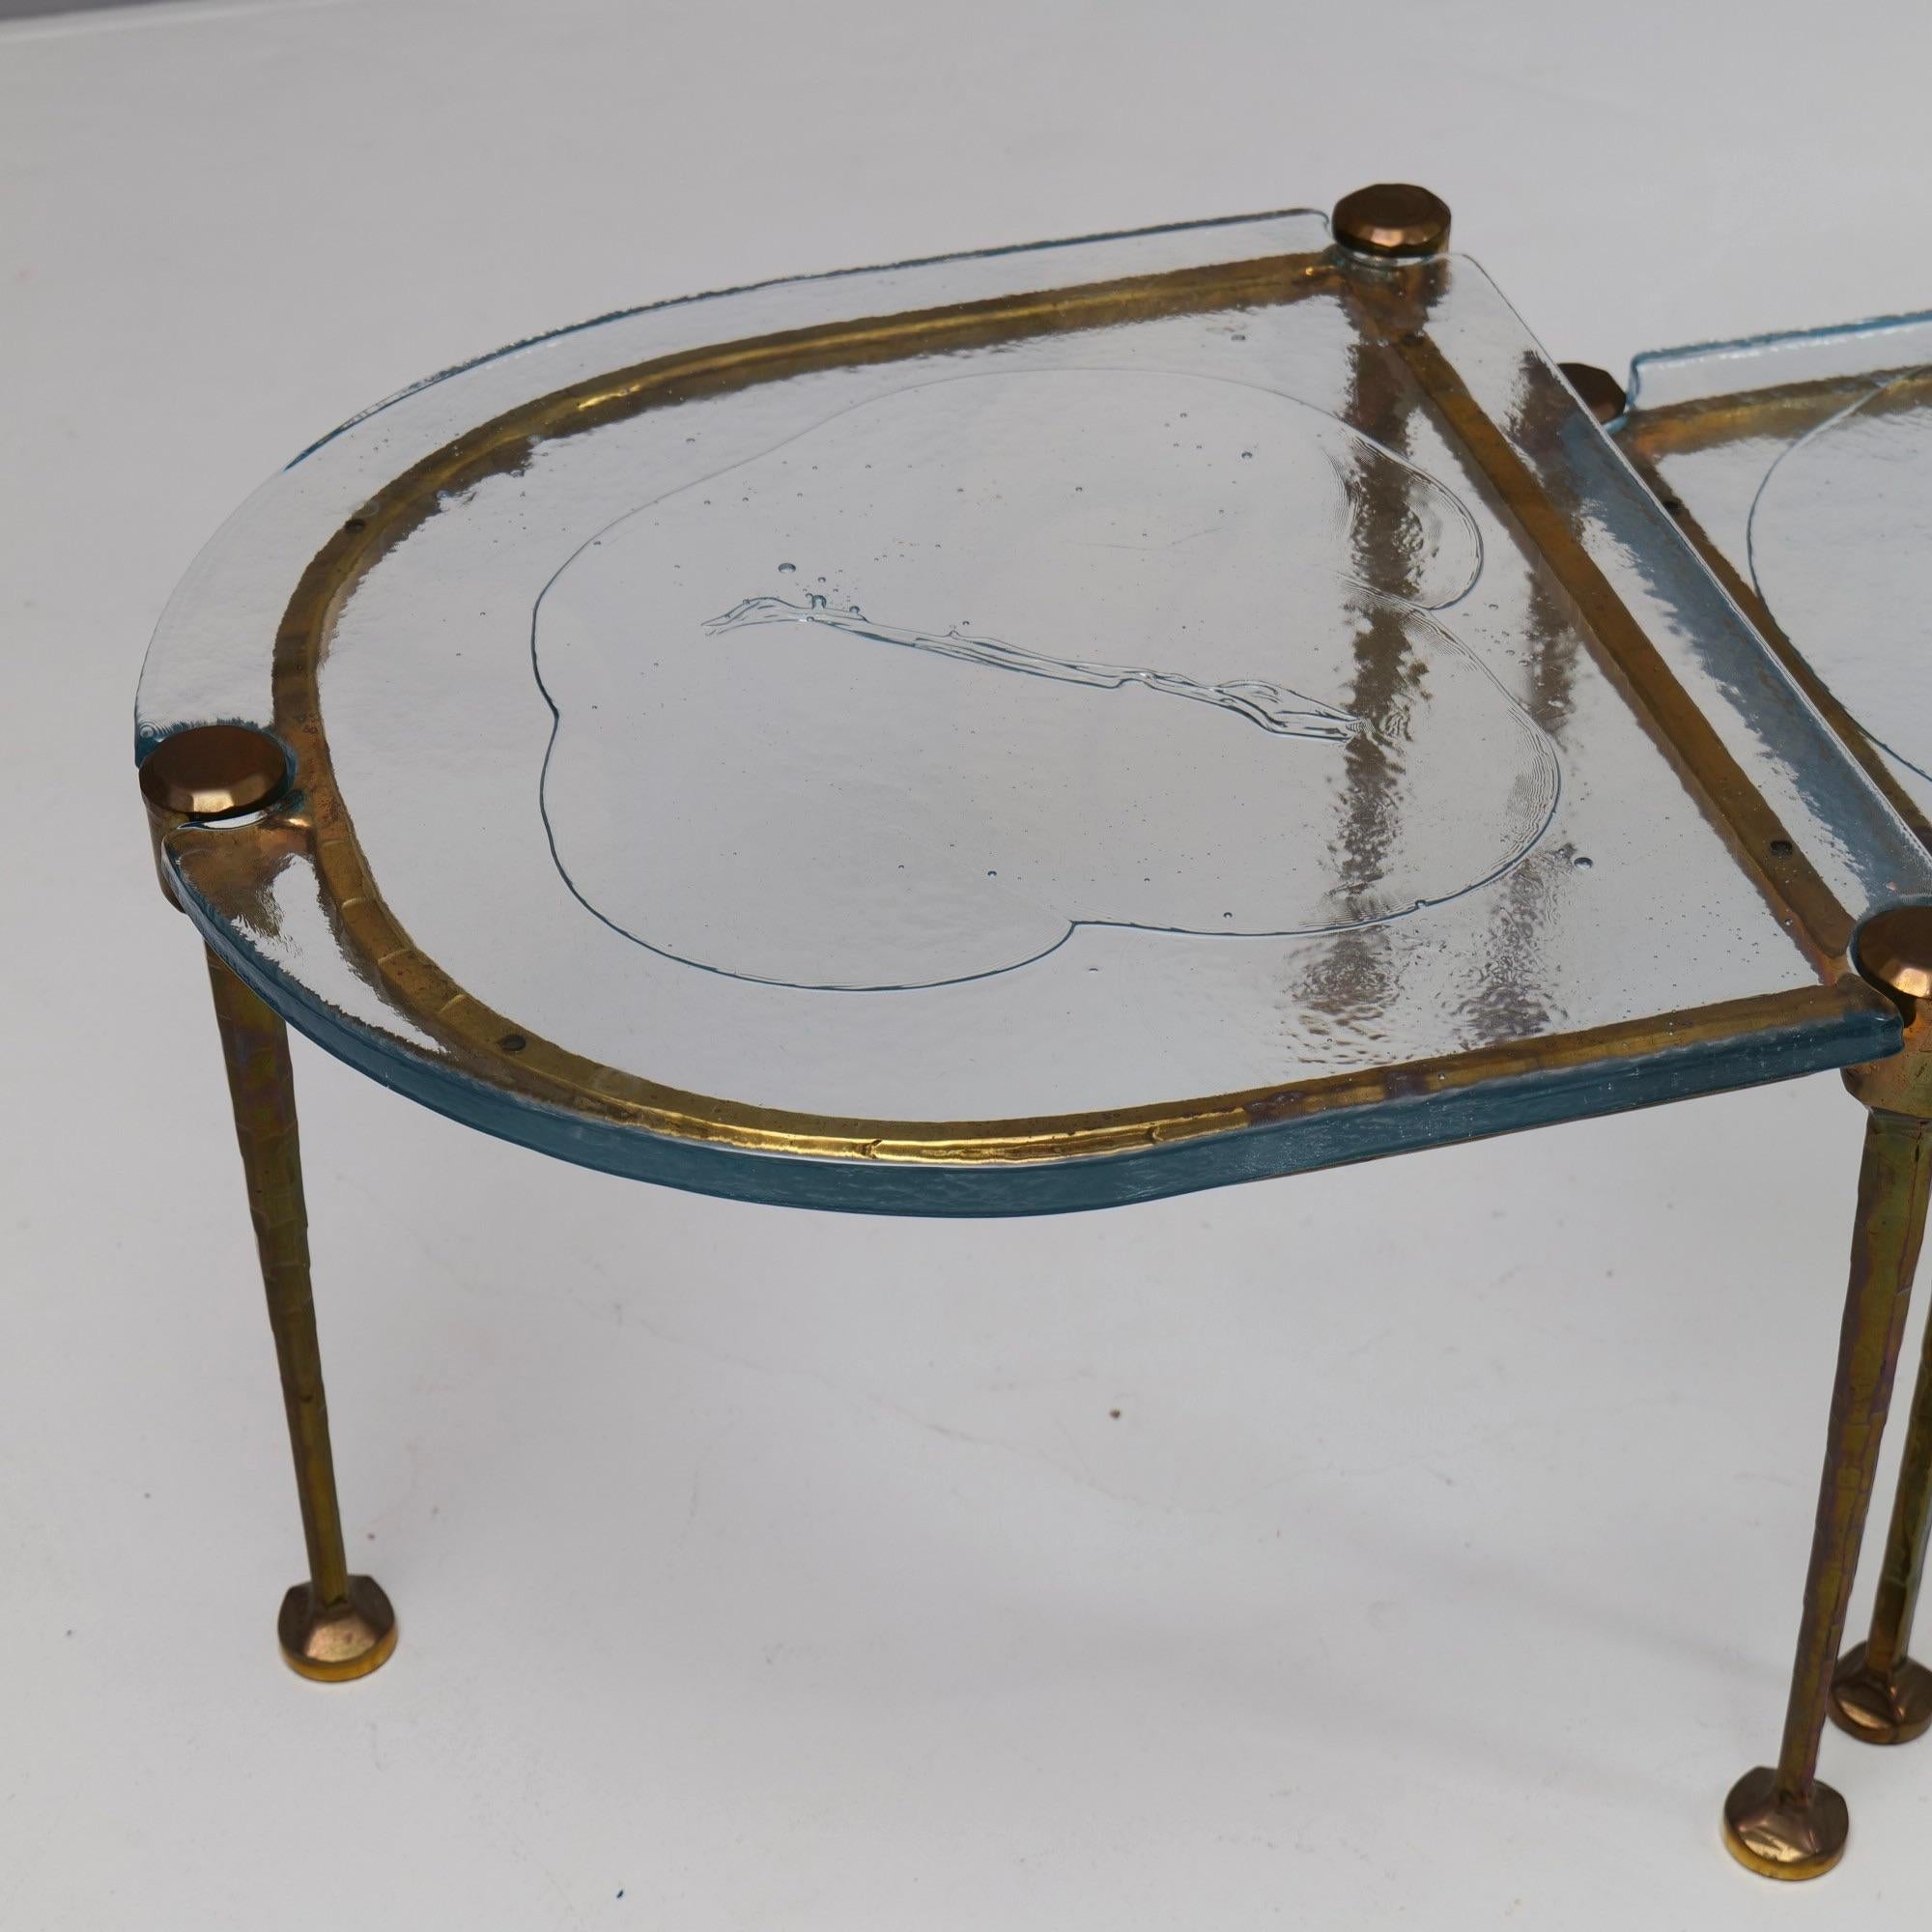 Bronze forged bronze tables with blue cast glass - 1980s brutalist